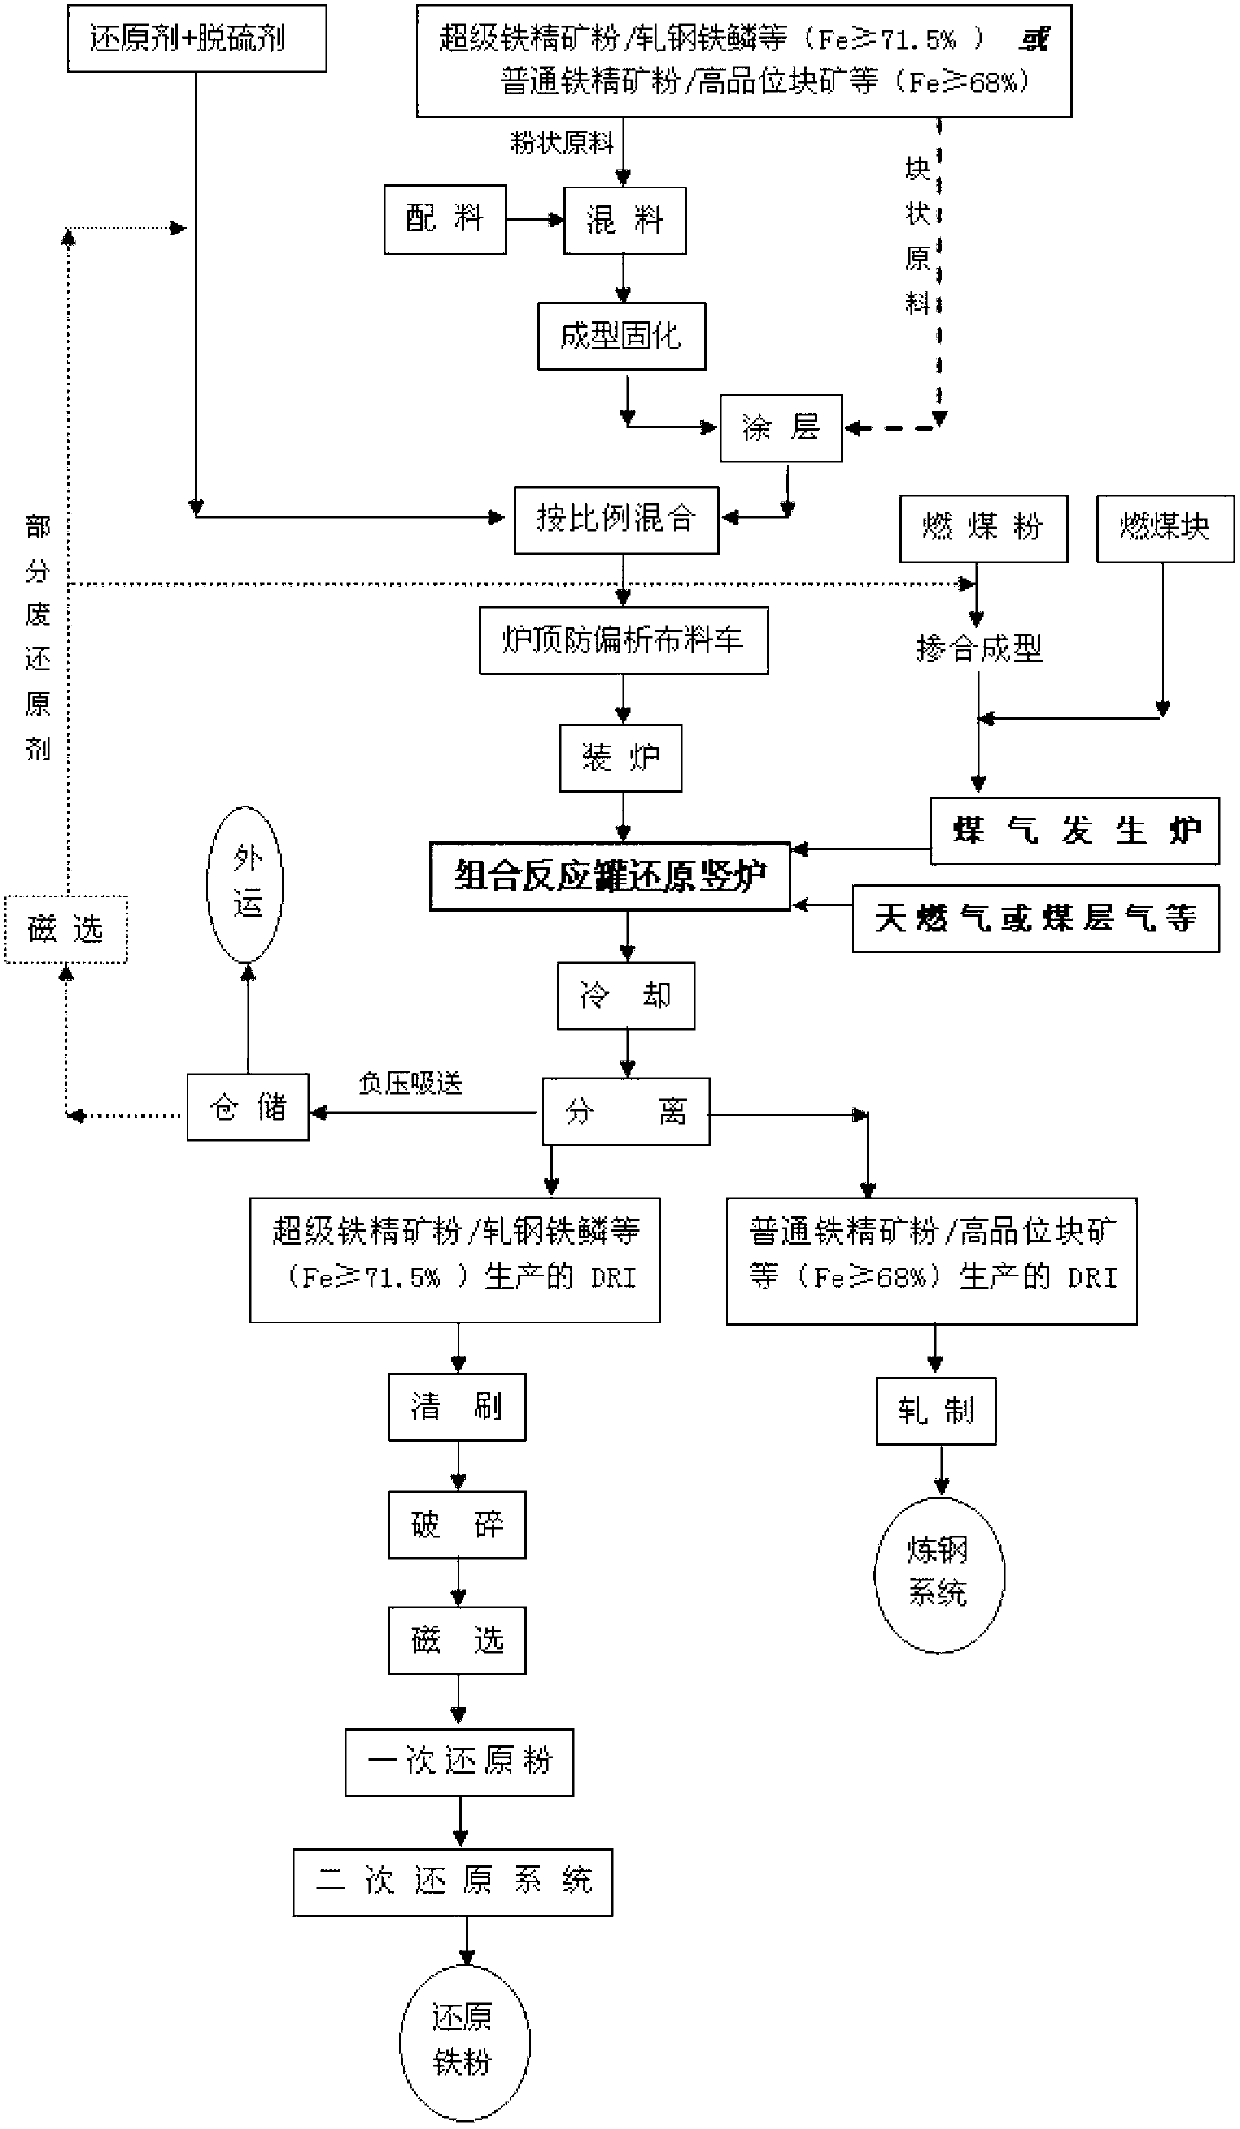 Method and equipment for producing high-quality sponge iron for reduced iron powder